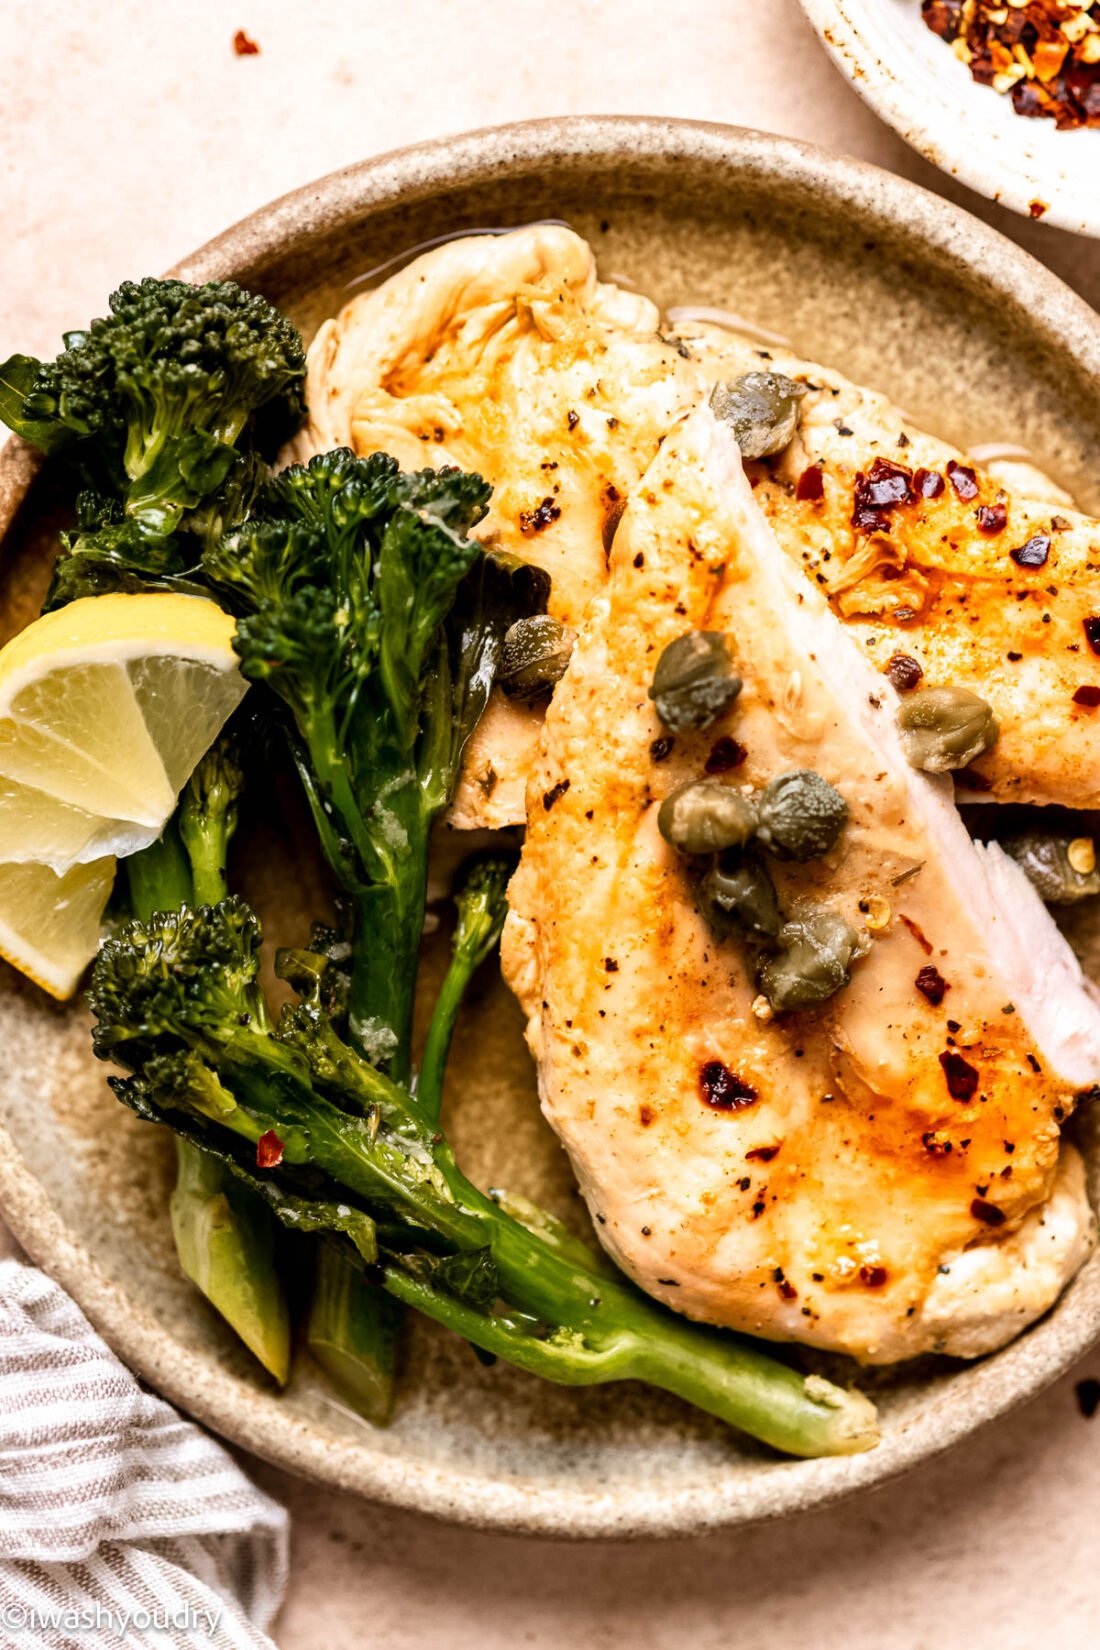 Cooked lemon chicken with broccolini on plate with lemon wedges.